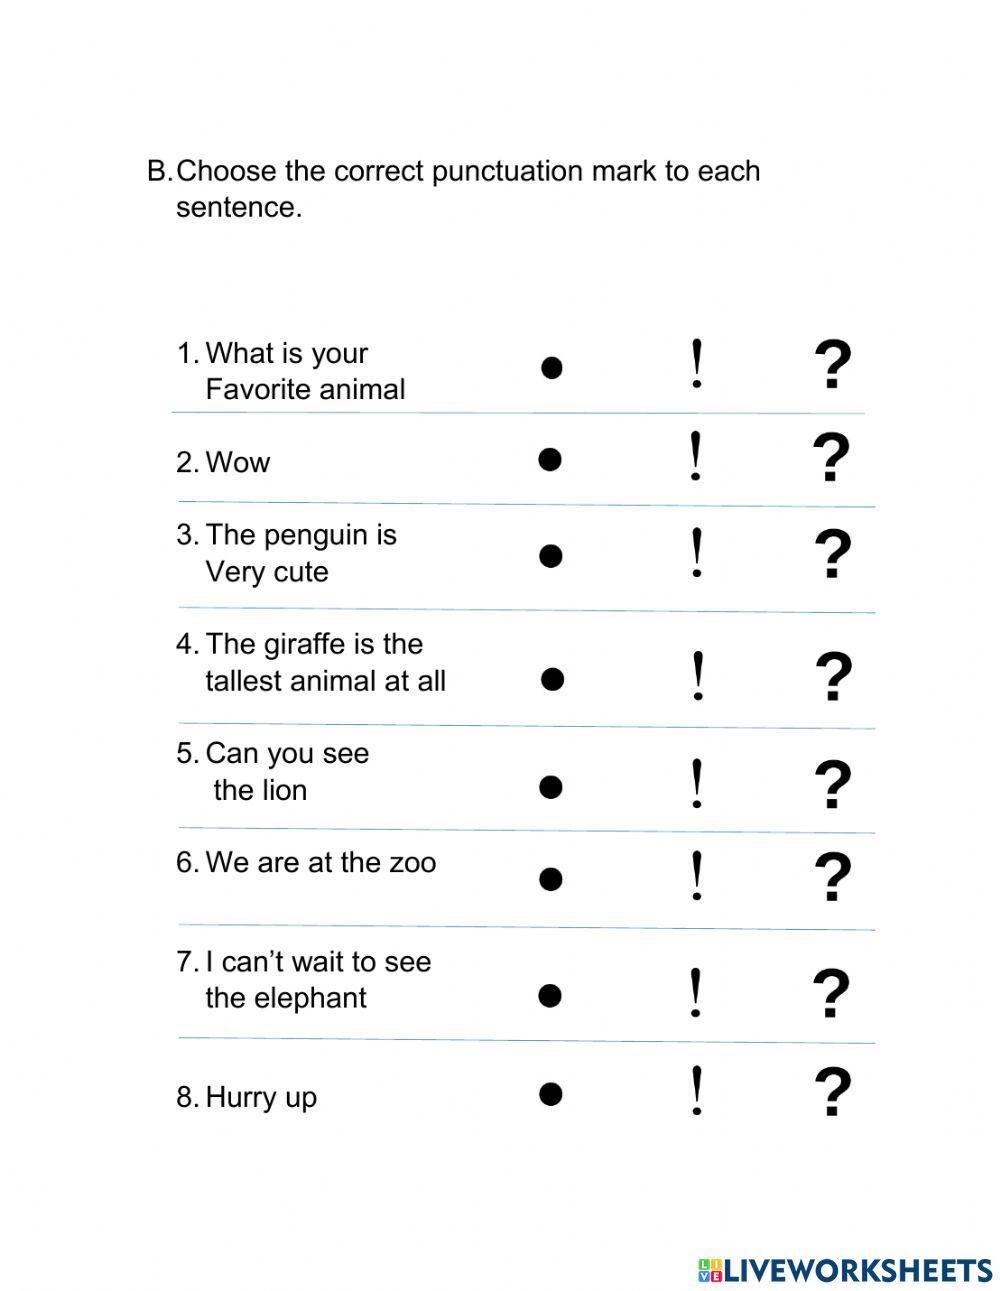 Puctuation marks